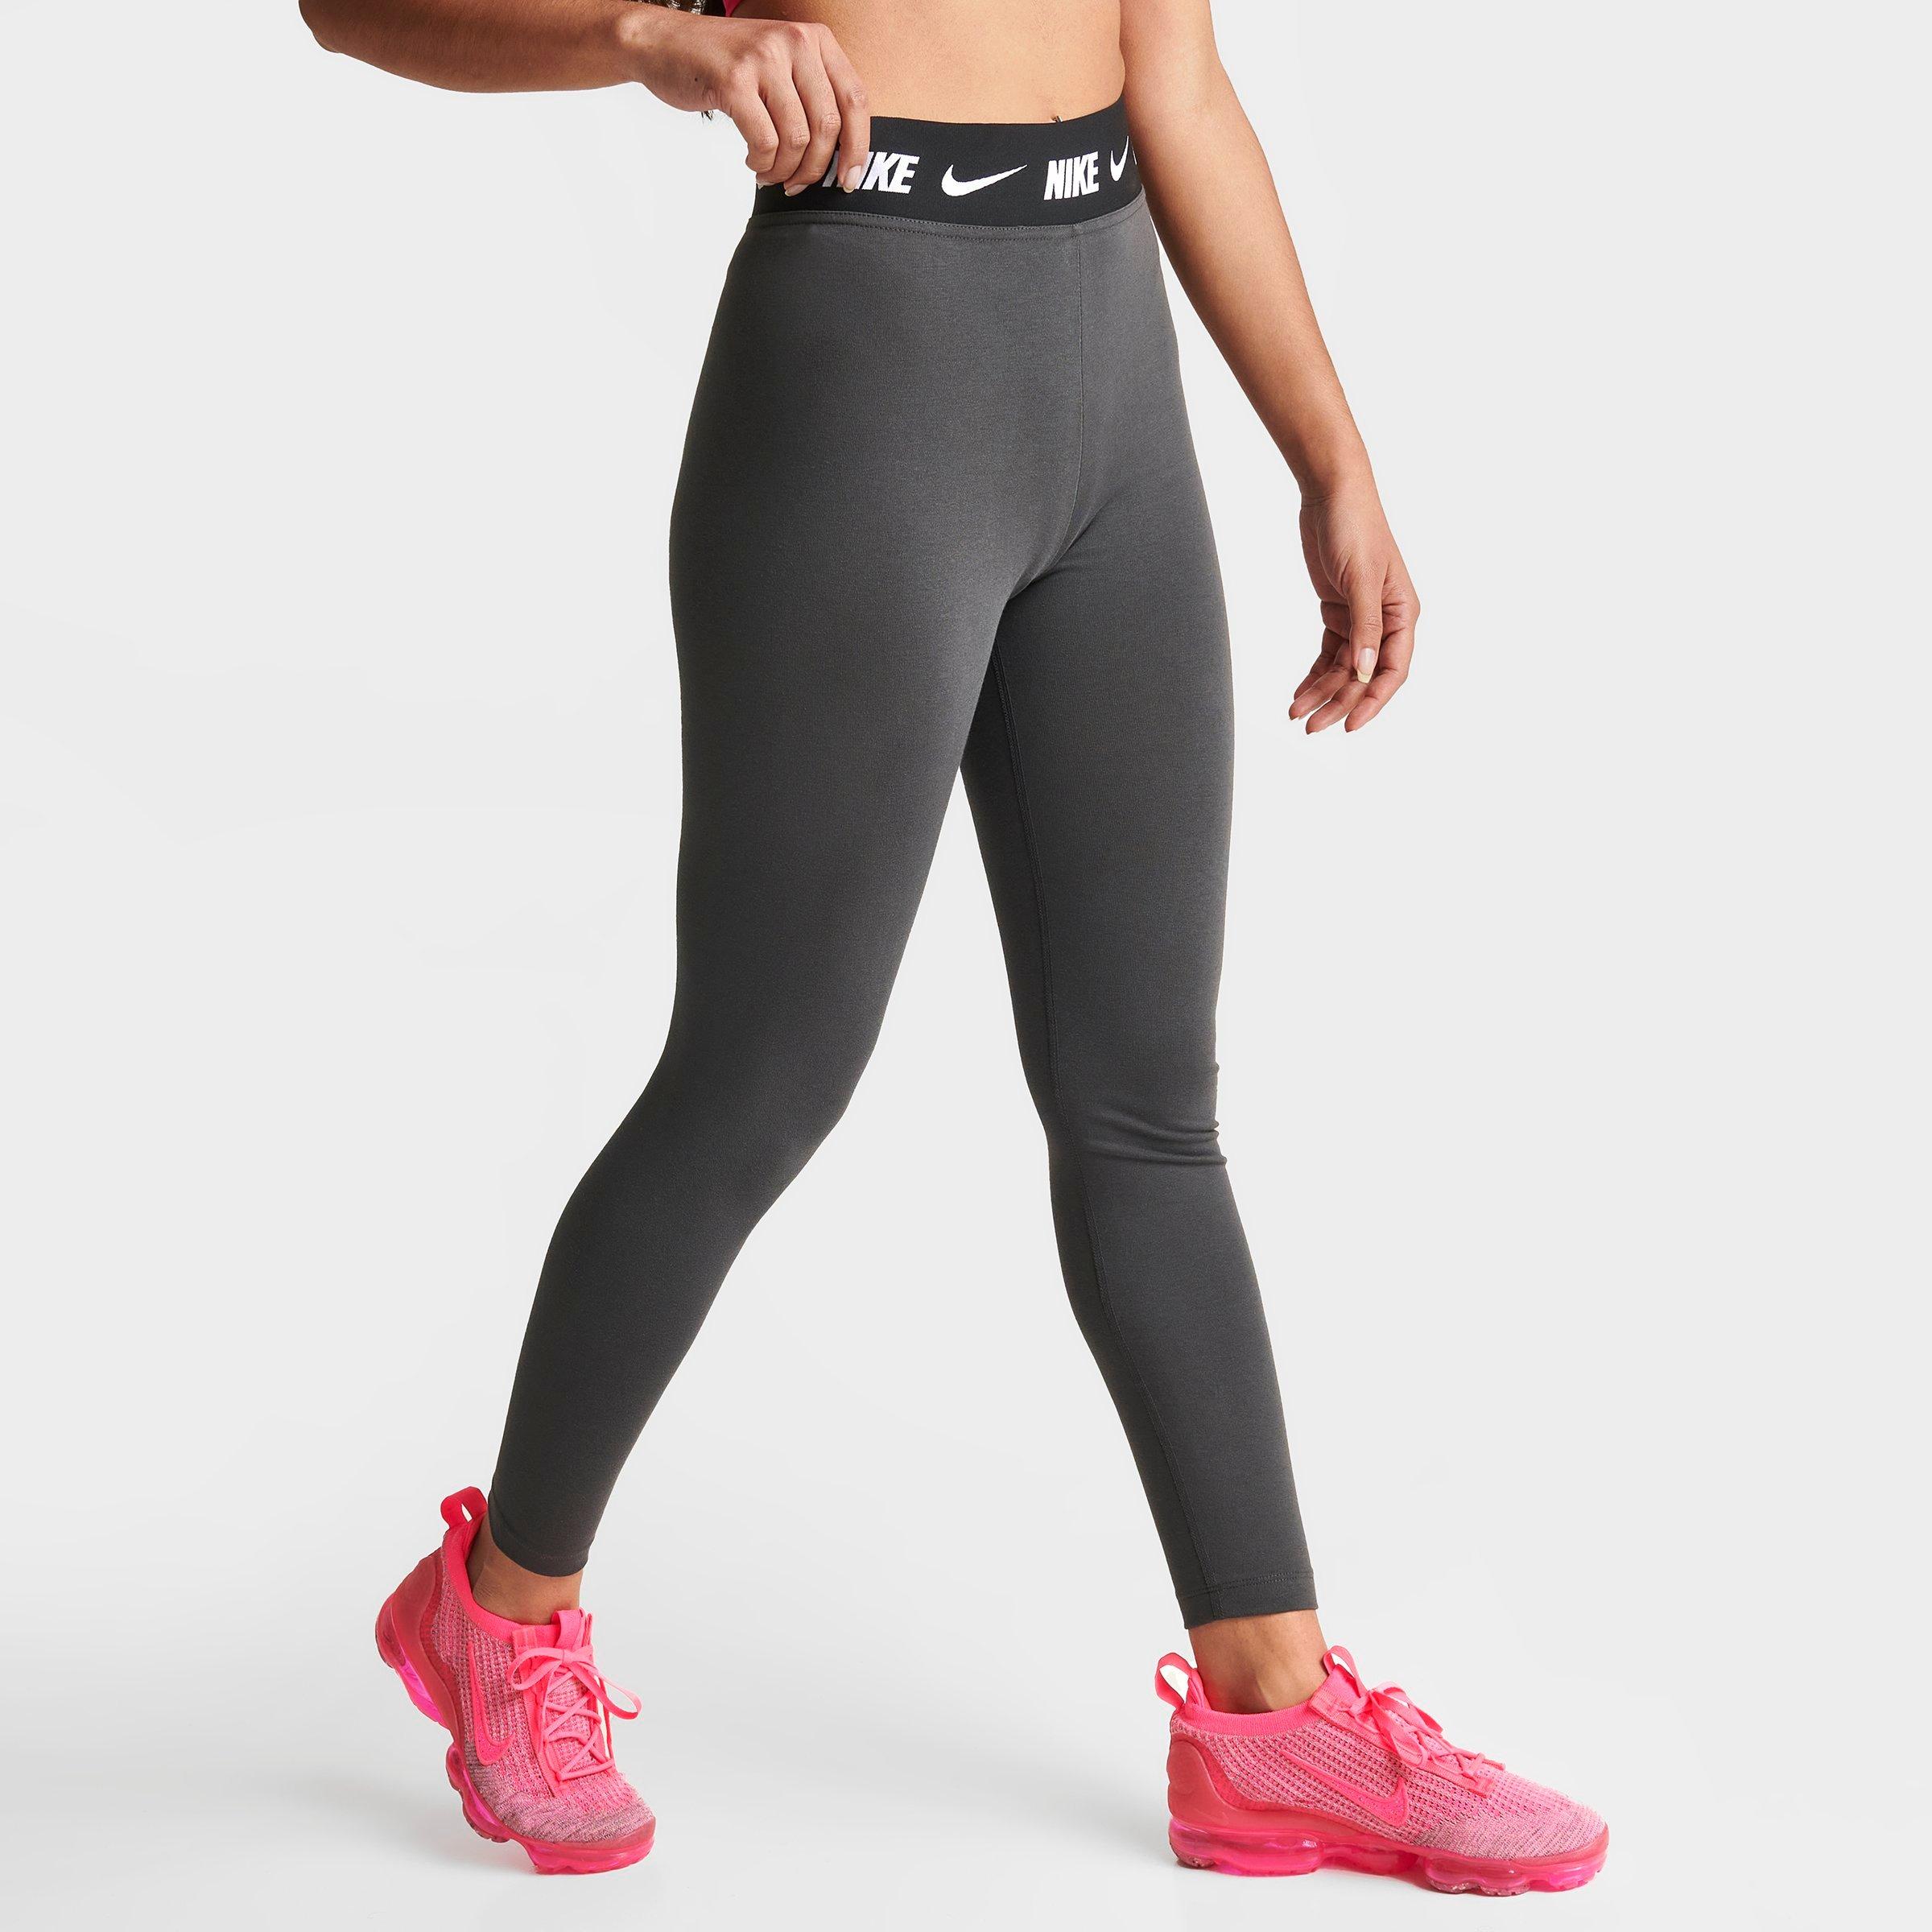 Shop JD Sports Women's Leggings up to 85% Off